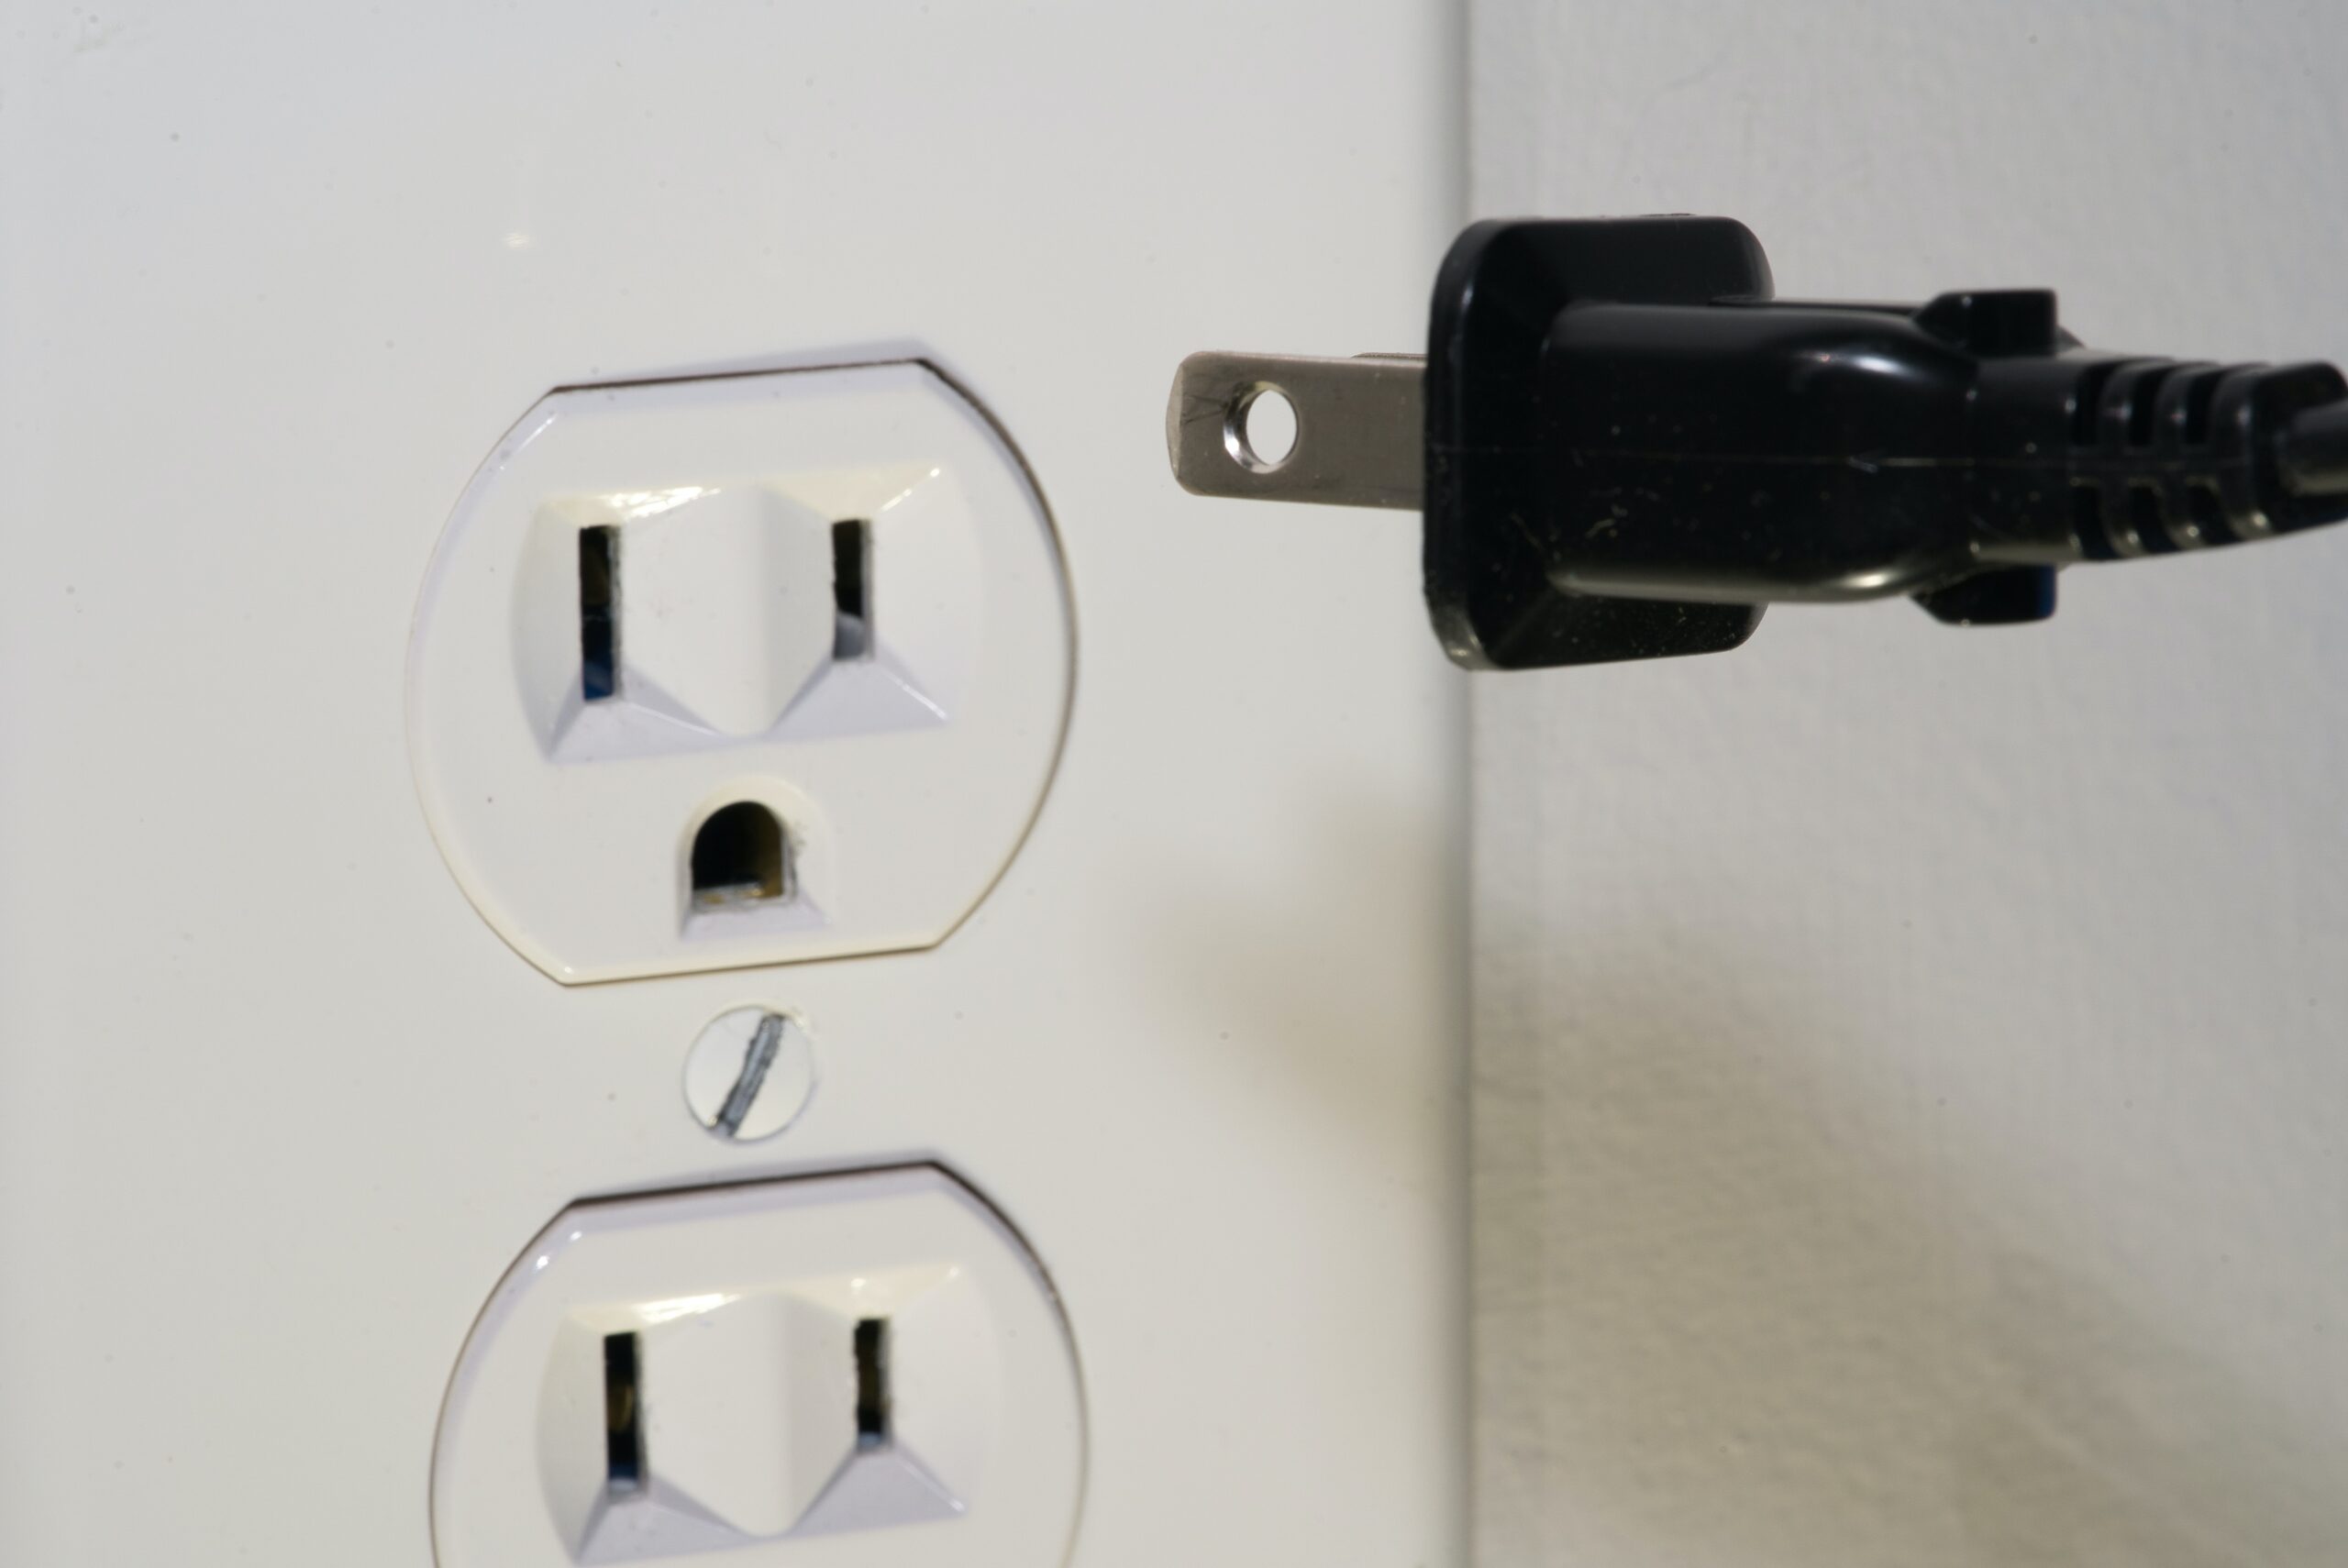 american plug socket and outlet